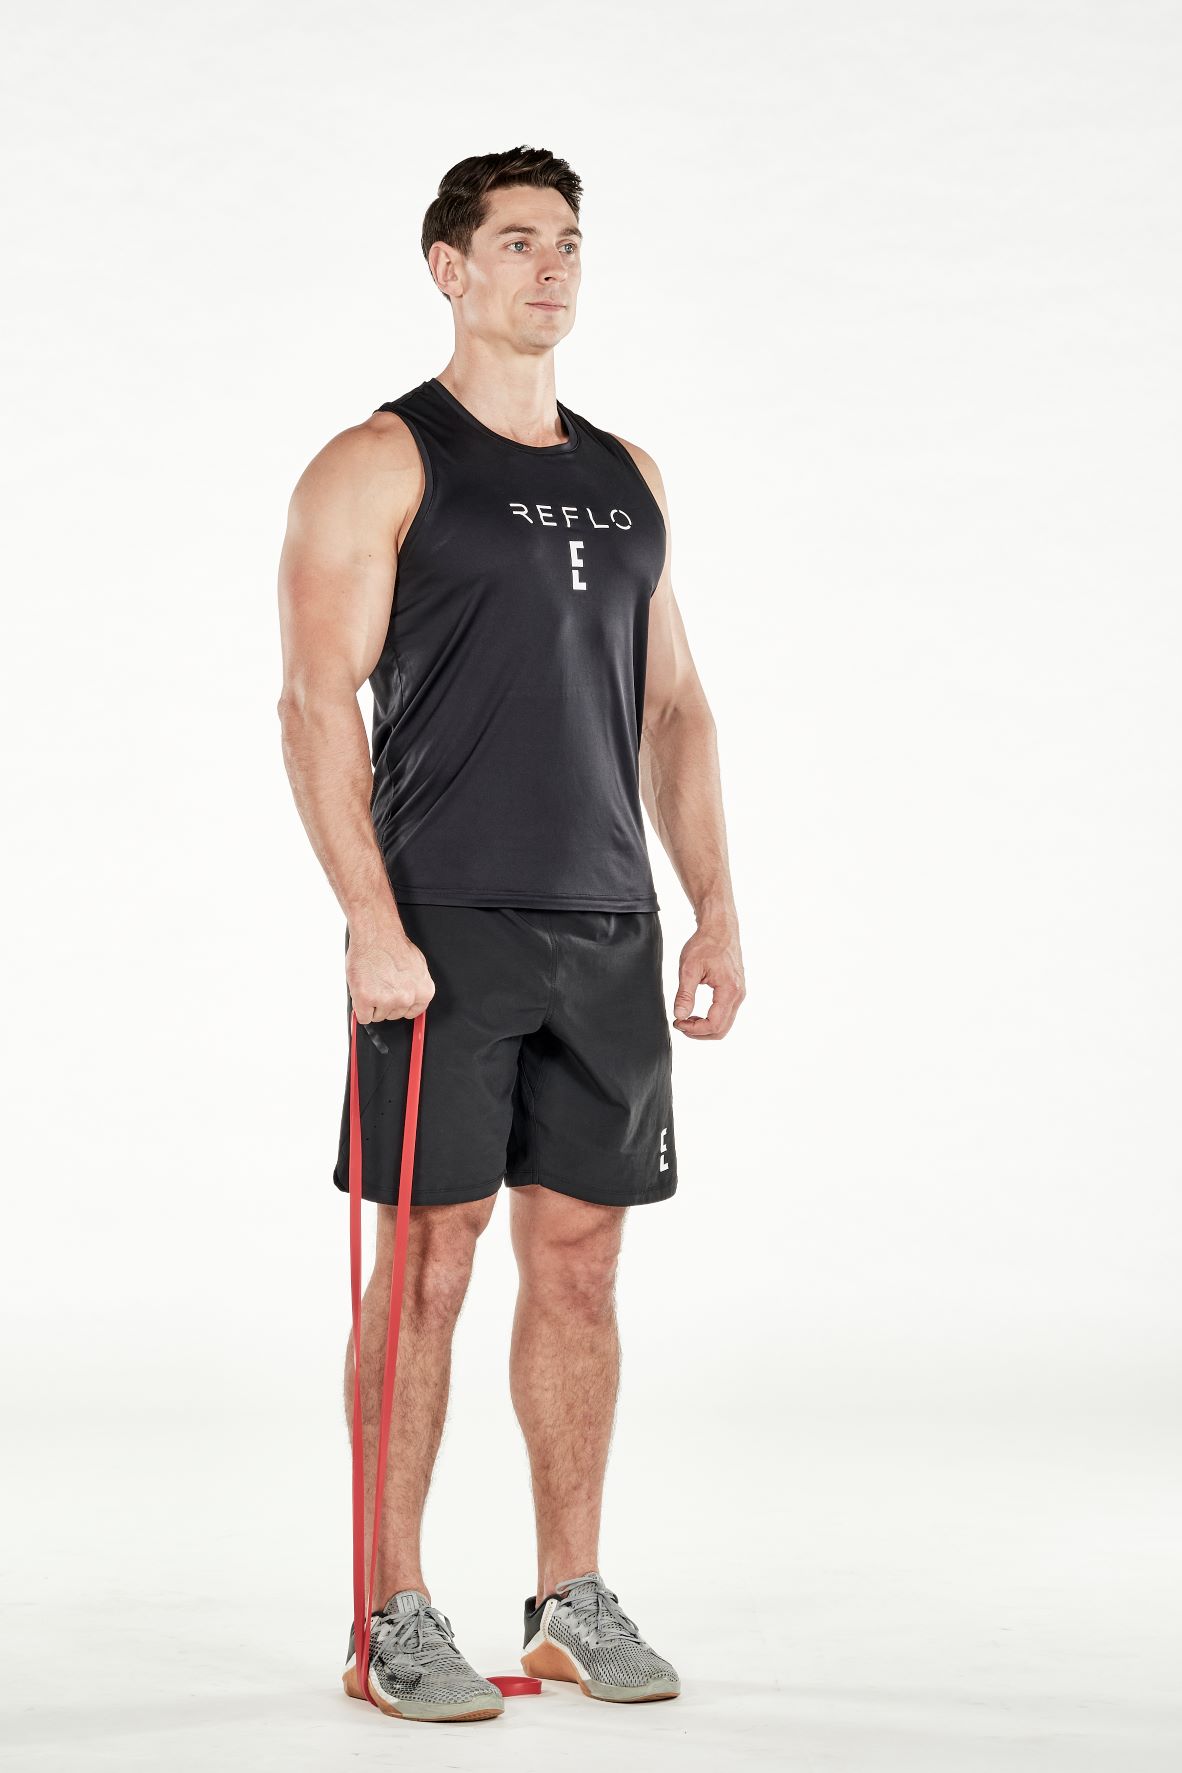 man demonstrating step one of resistance band front raise; standing up straight, he is holding a resistance band that is wrapped under one foot in one hand; he wears a black fitness vest, black shorts and trainers